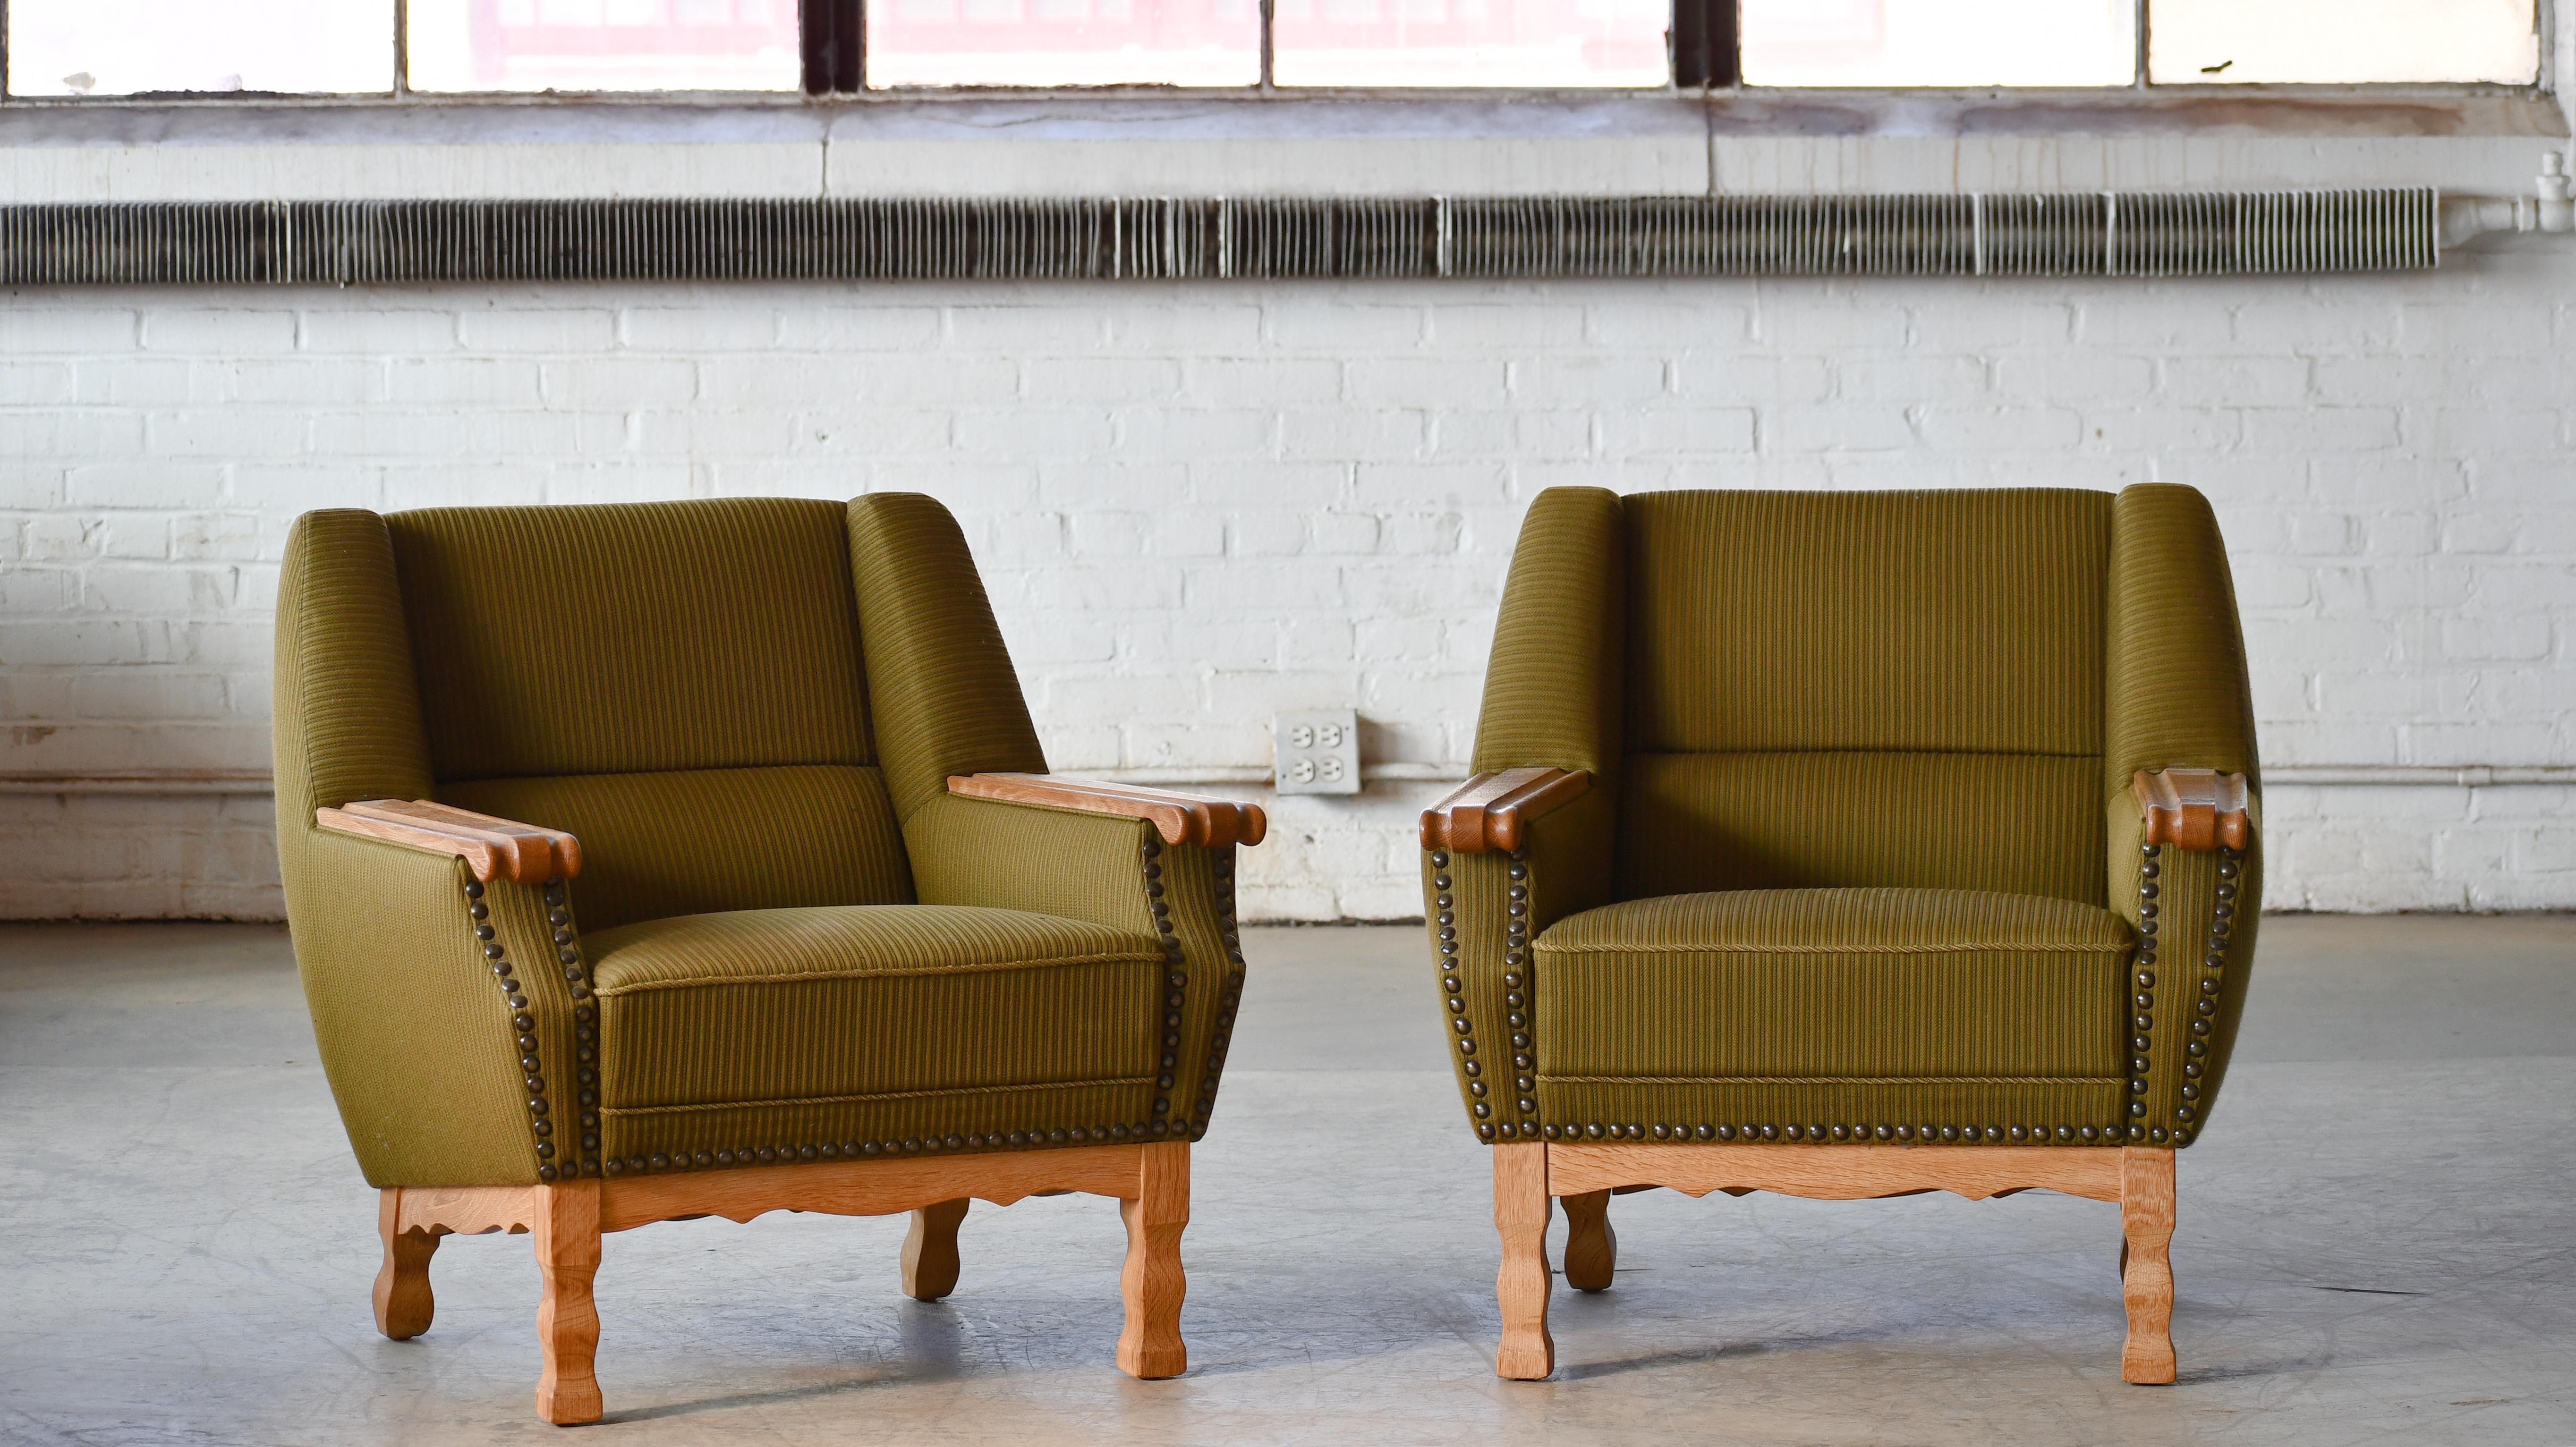 Rare and sought after pair of  lounge chairs by Danish Designer, Henning Kjaernulf made from quarter-sawn white oak and hand carved in brutalist style seeking inspiration from art & crafts and even Jacobean styles. Kjaernulfs style is very unique